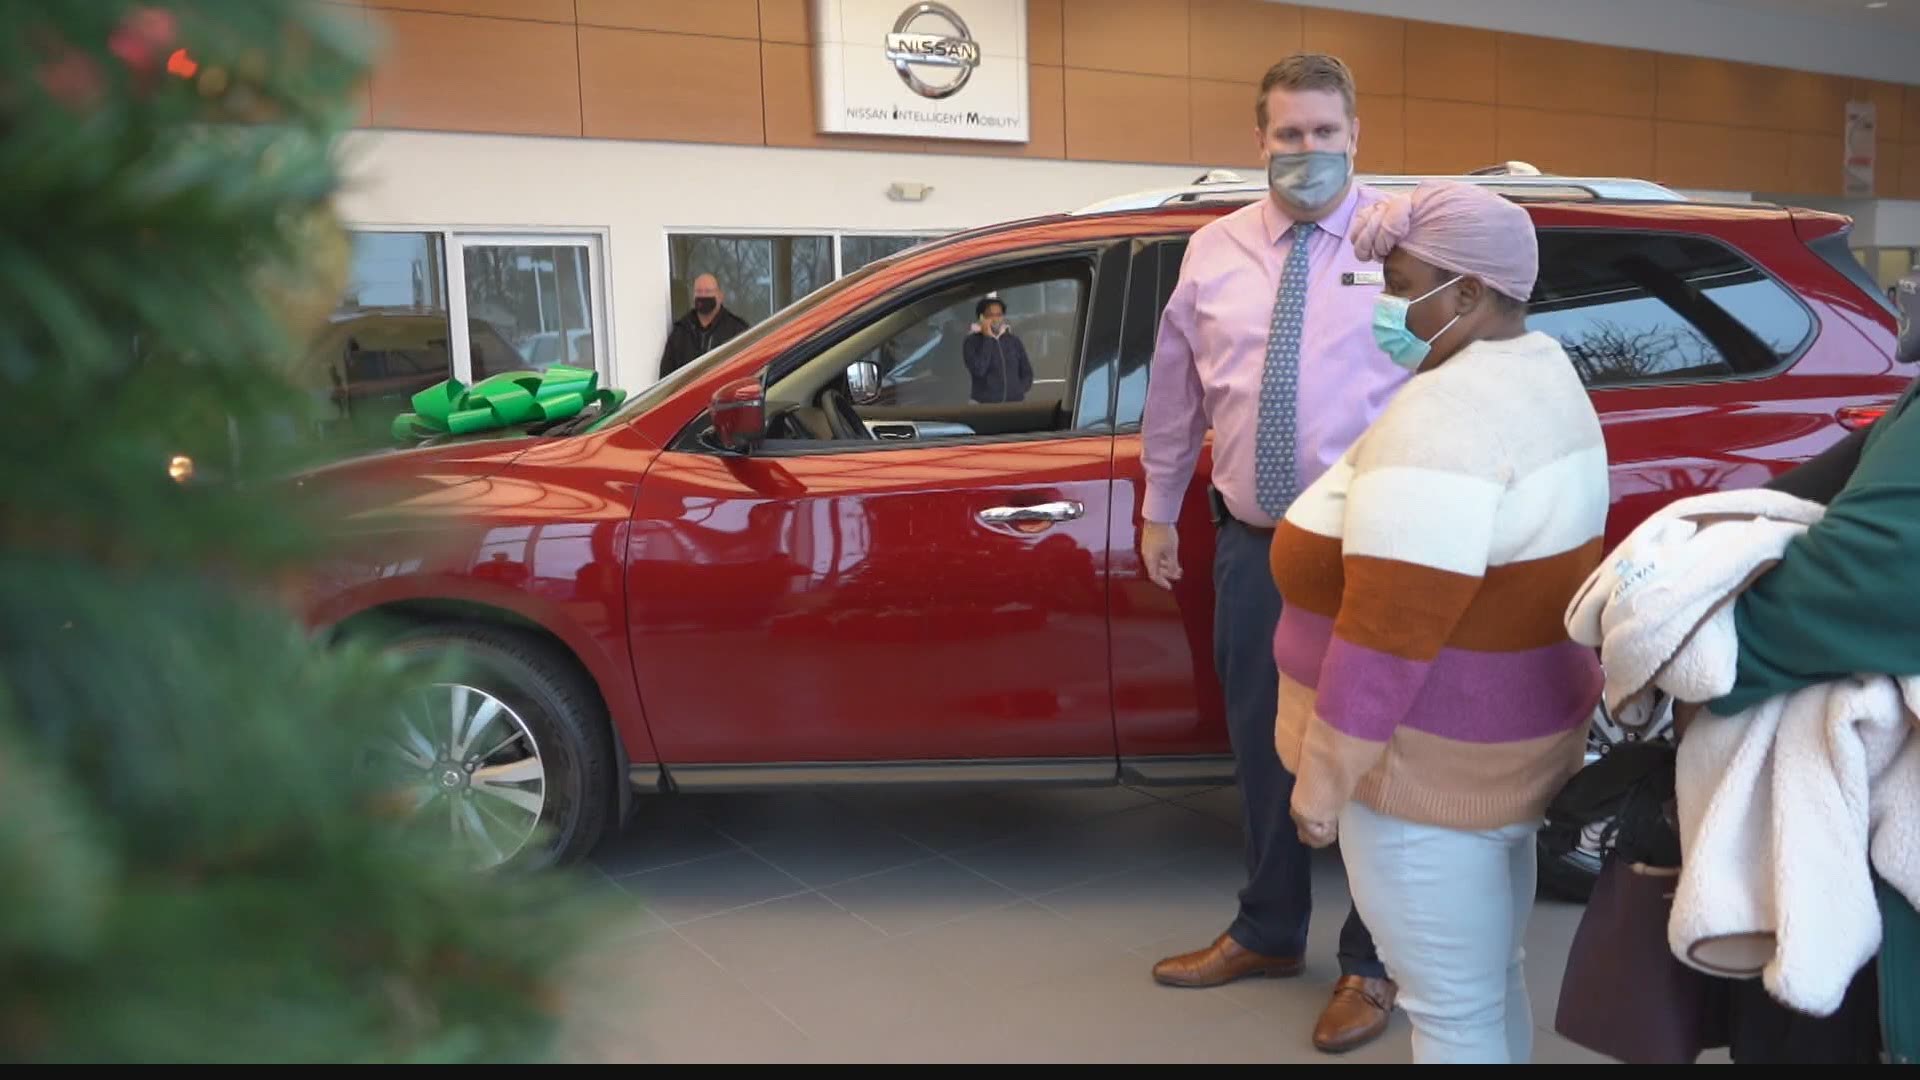 The woman who works overtime to buy gifts for others got one of her own Thursday.